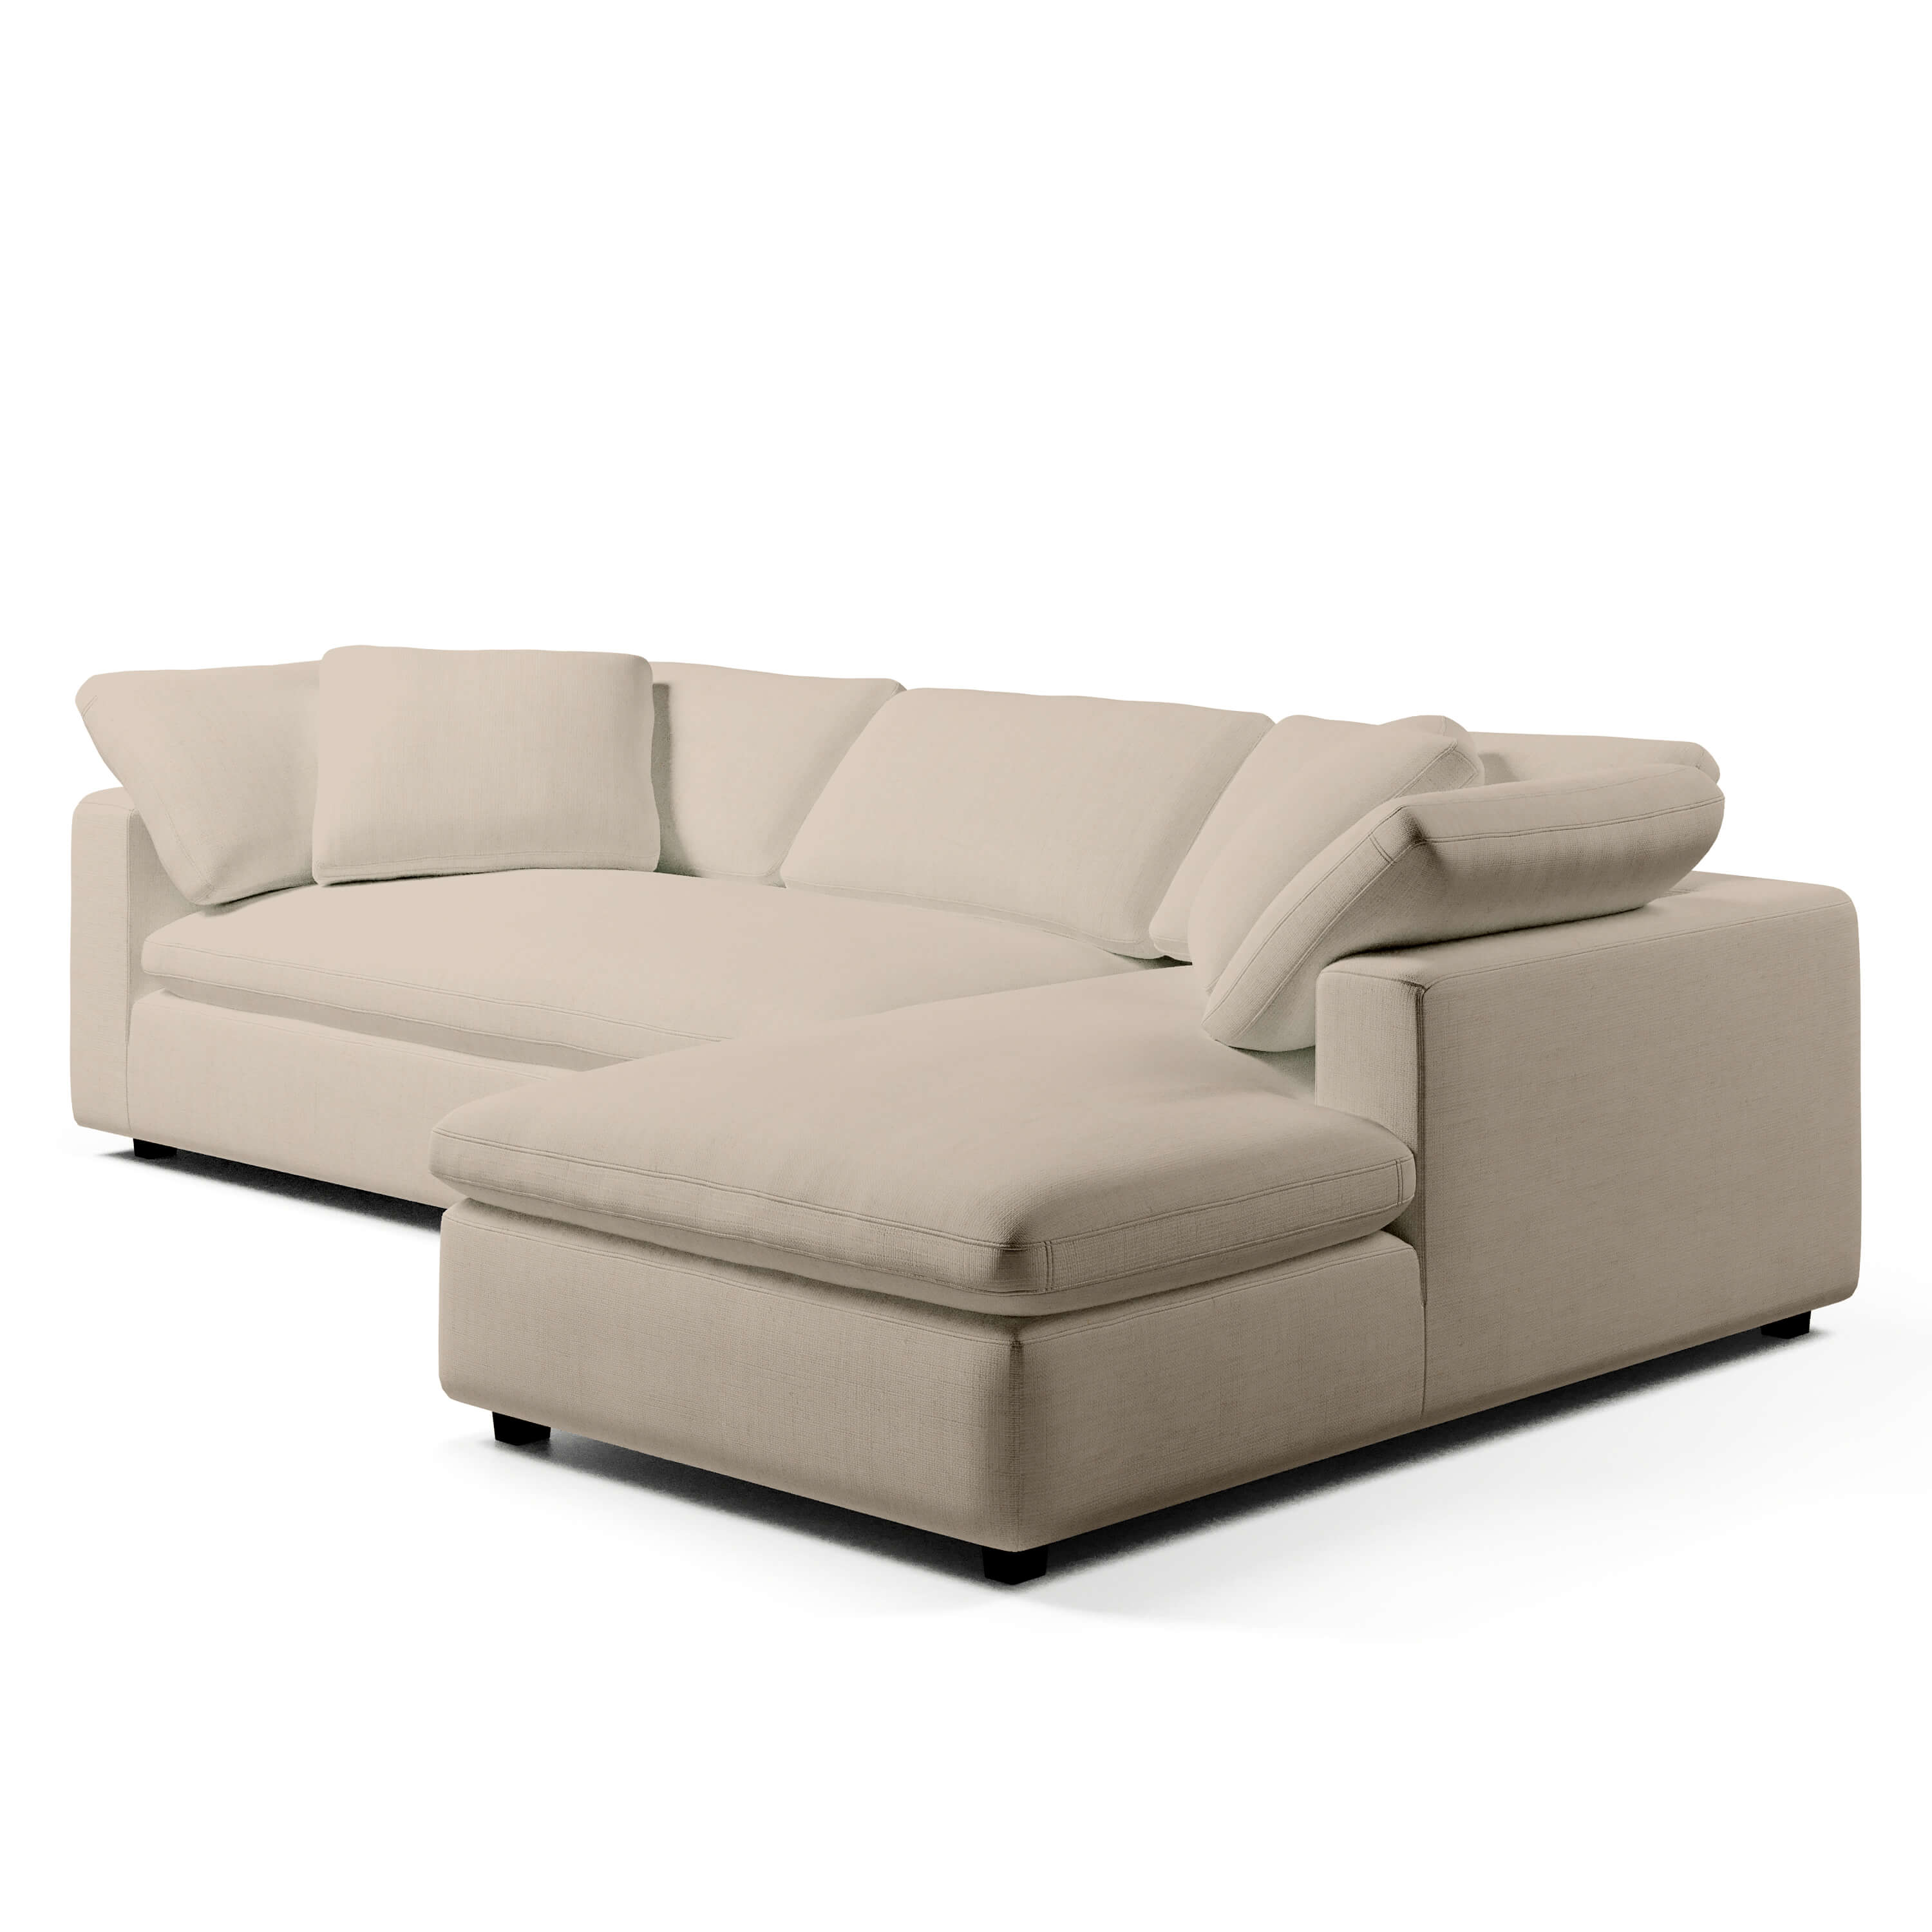 Comfy Modular Sofa - 3-Seater Right-Arm Chaise Bench-Seat